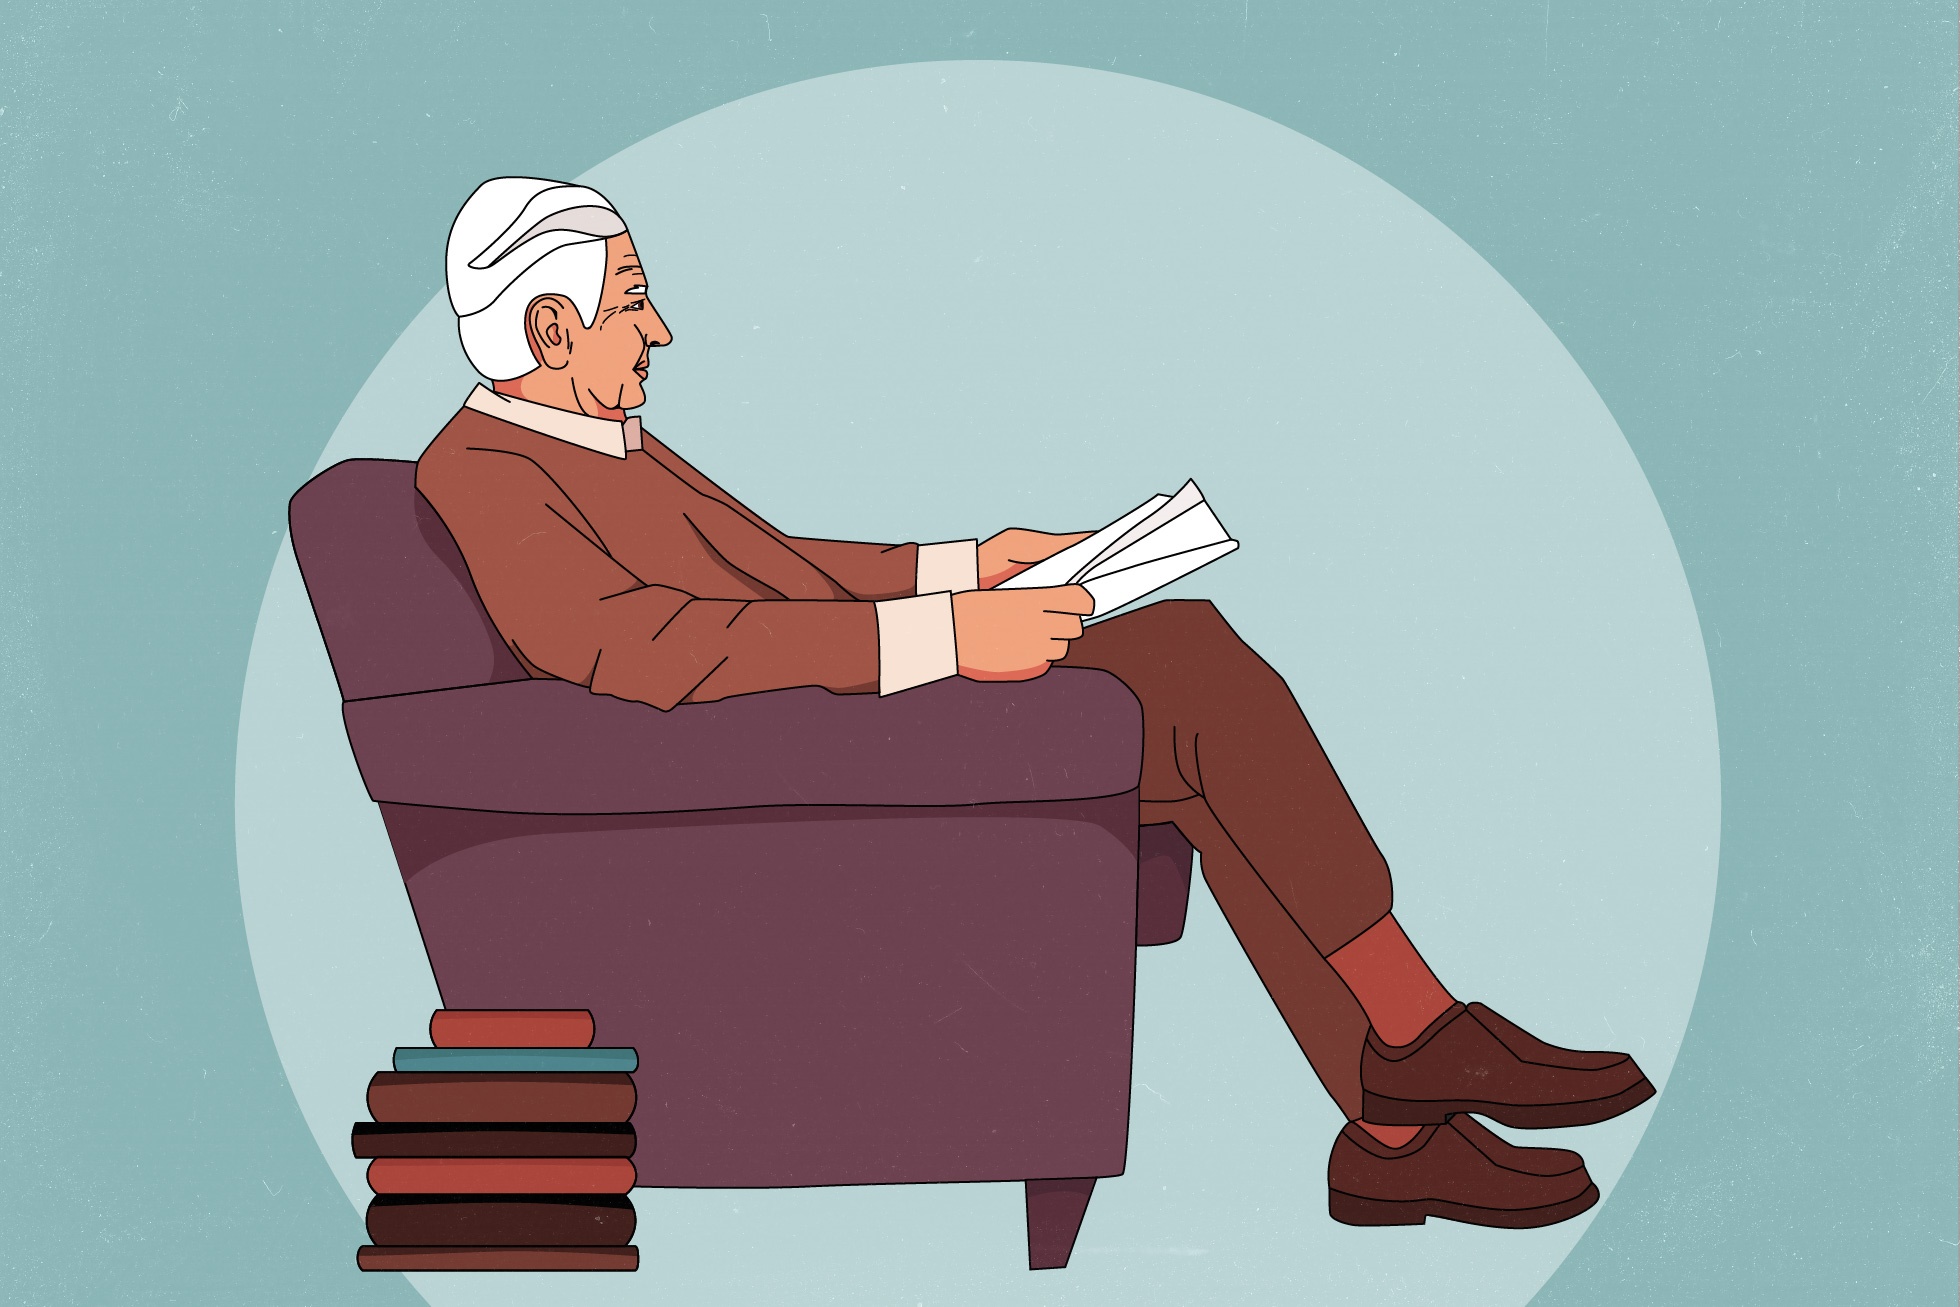 A drawing of a man with white hair and brown clothes sitting in a chair reading a book. A small pile of books is on the floor.